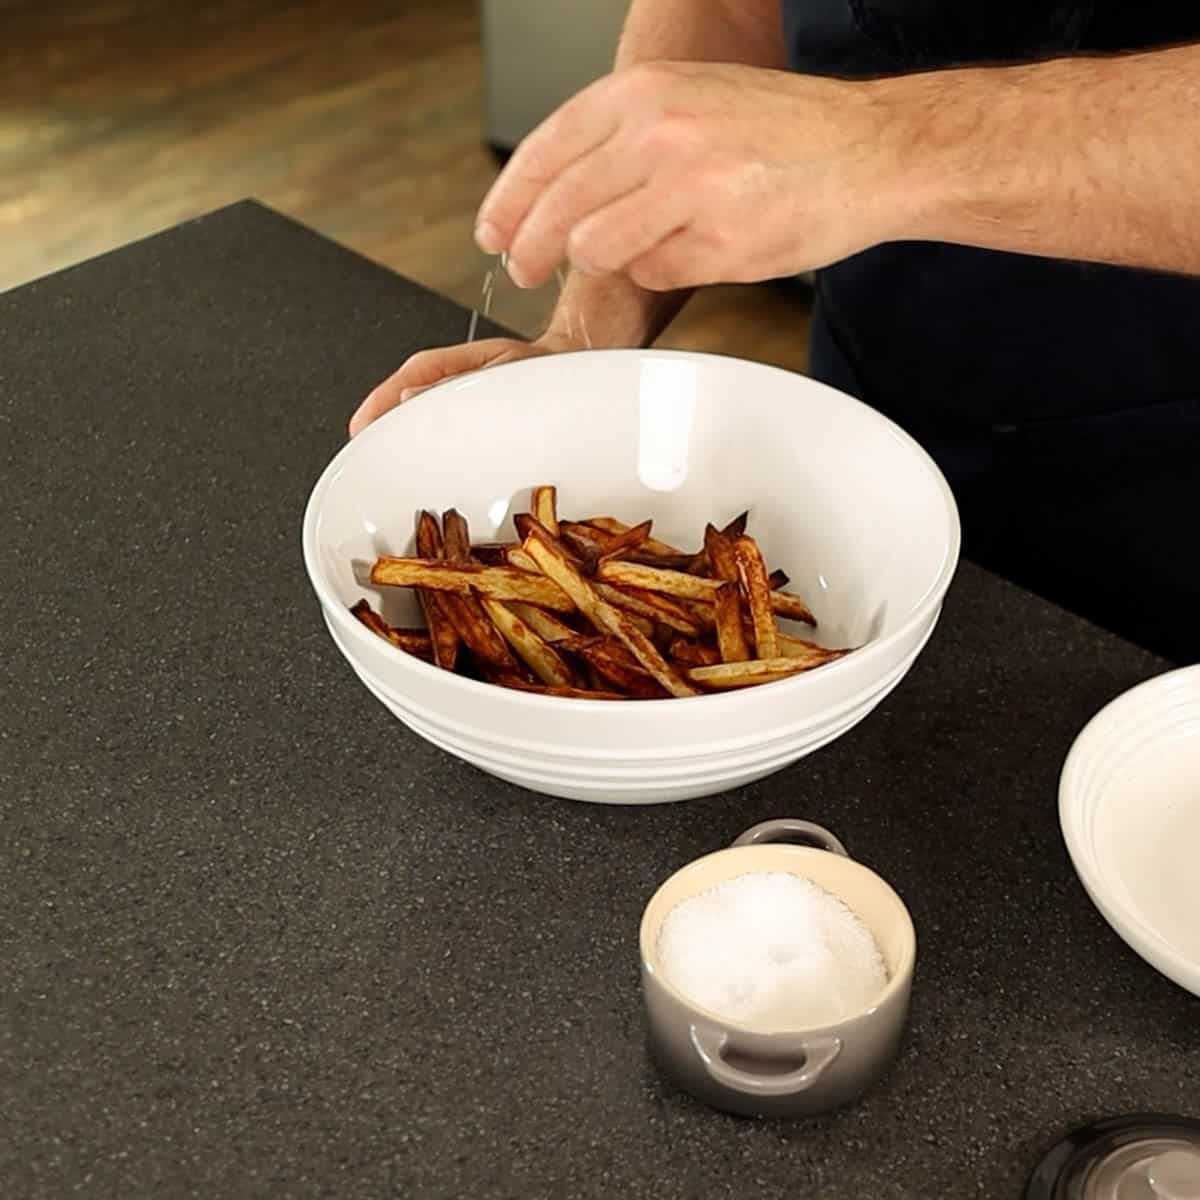 Seasoning French fries in a white mixing bowl